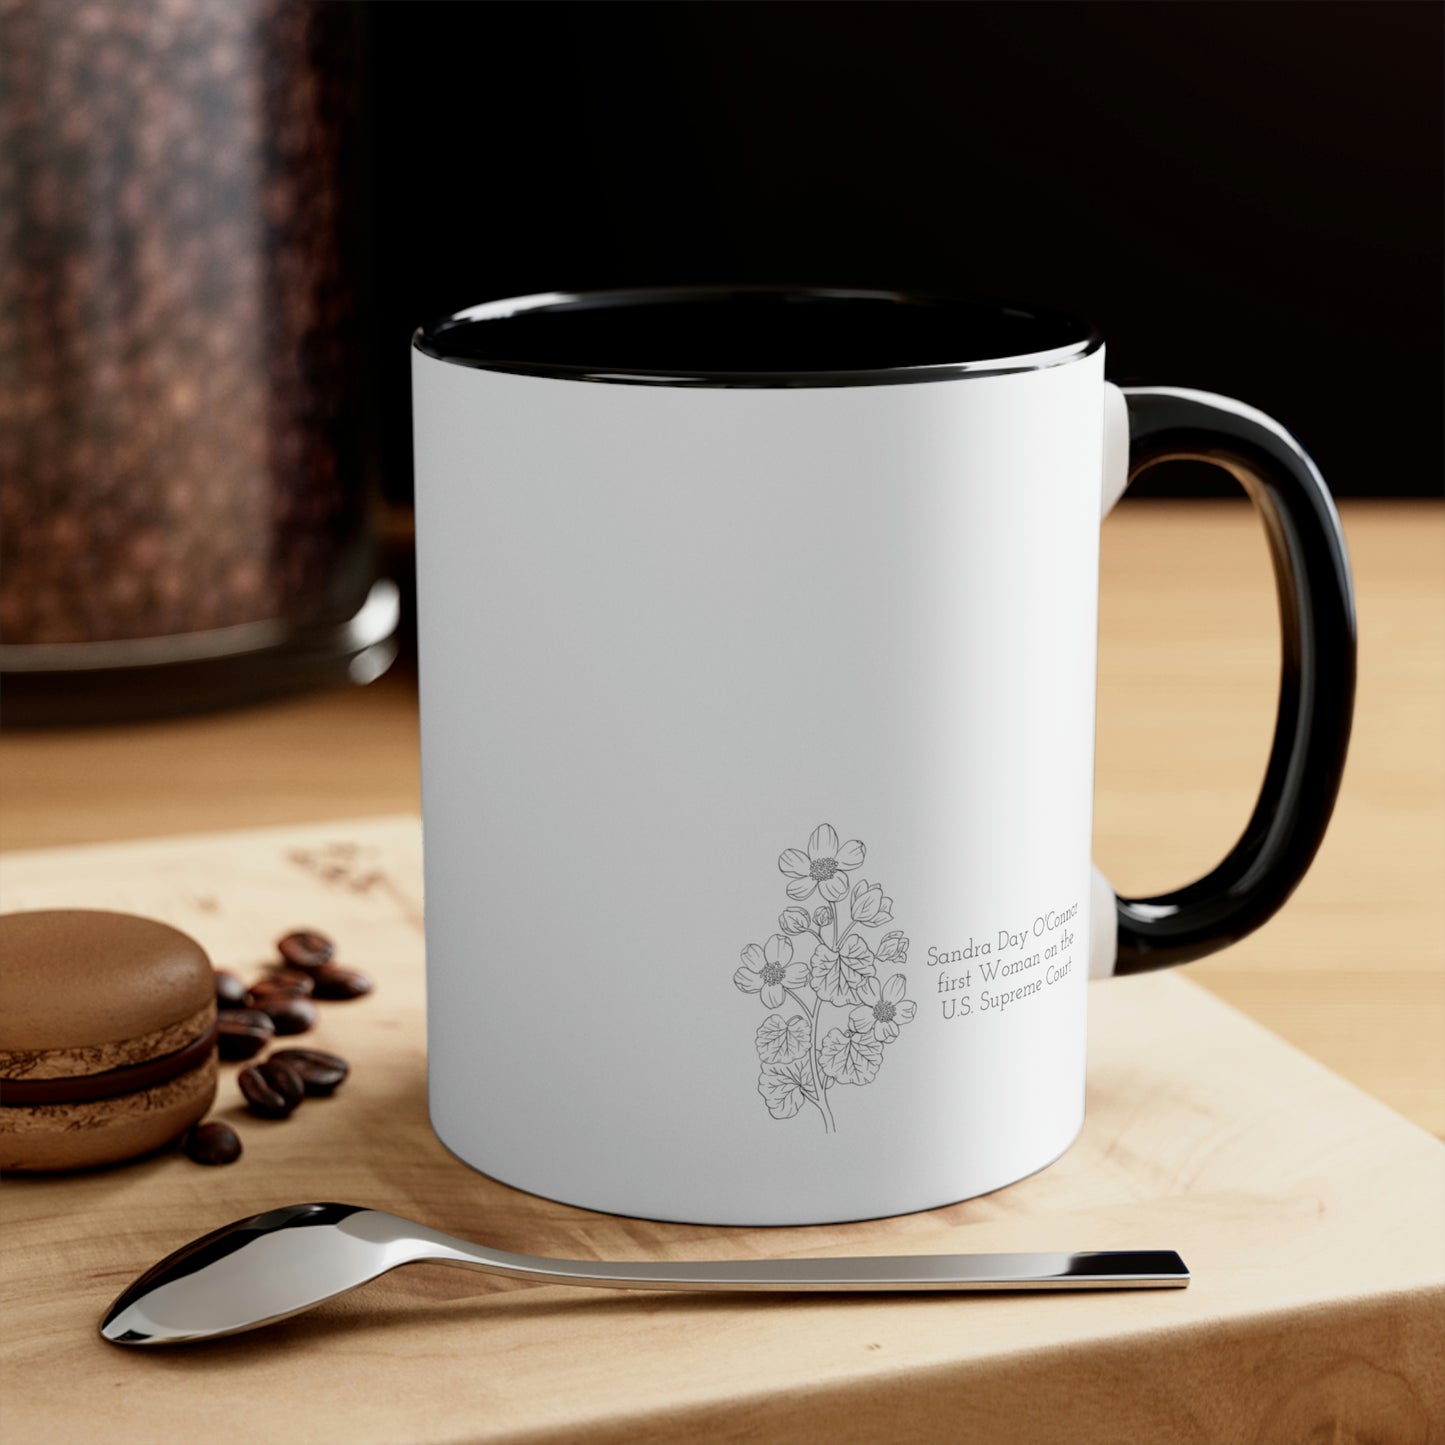 "No time left for you as a woman" Accent Coffee Mug, 11oz